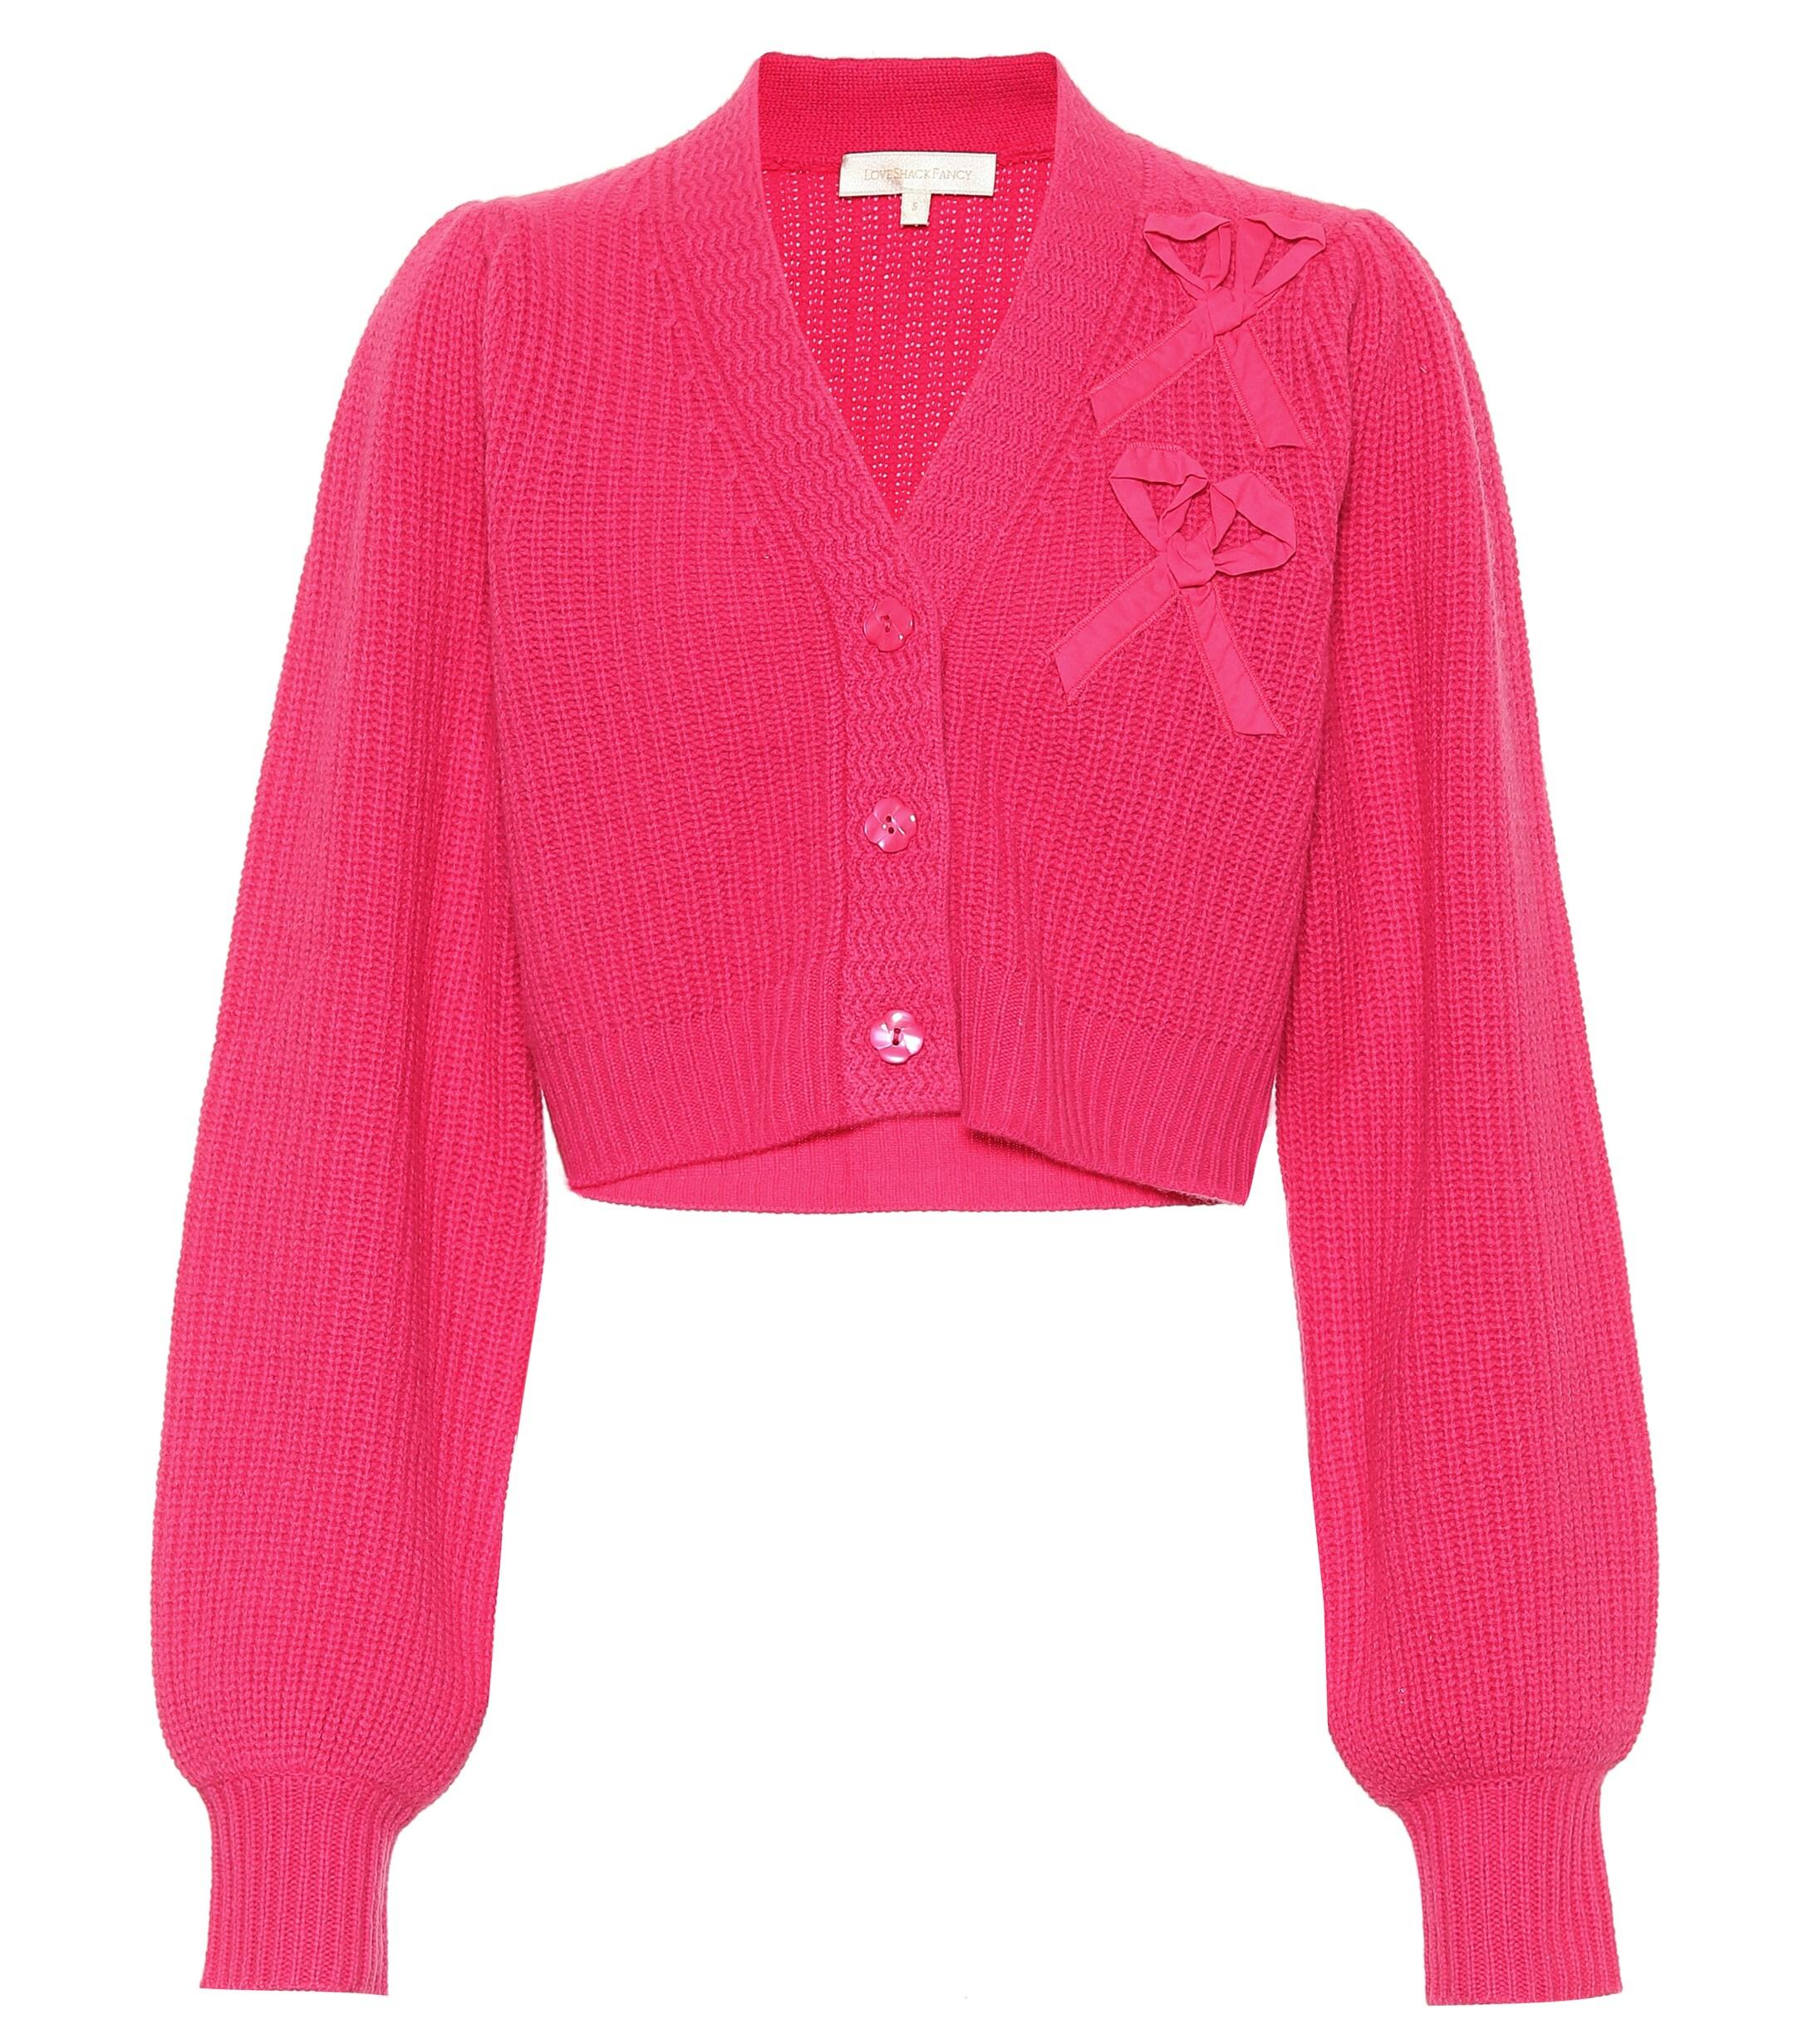 LoveShackFancy Avignon Cropped Cashmere Cardigan in Pink - Lyst